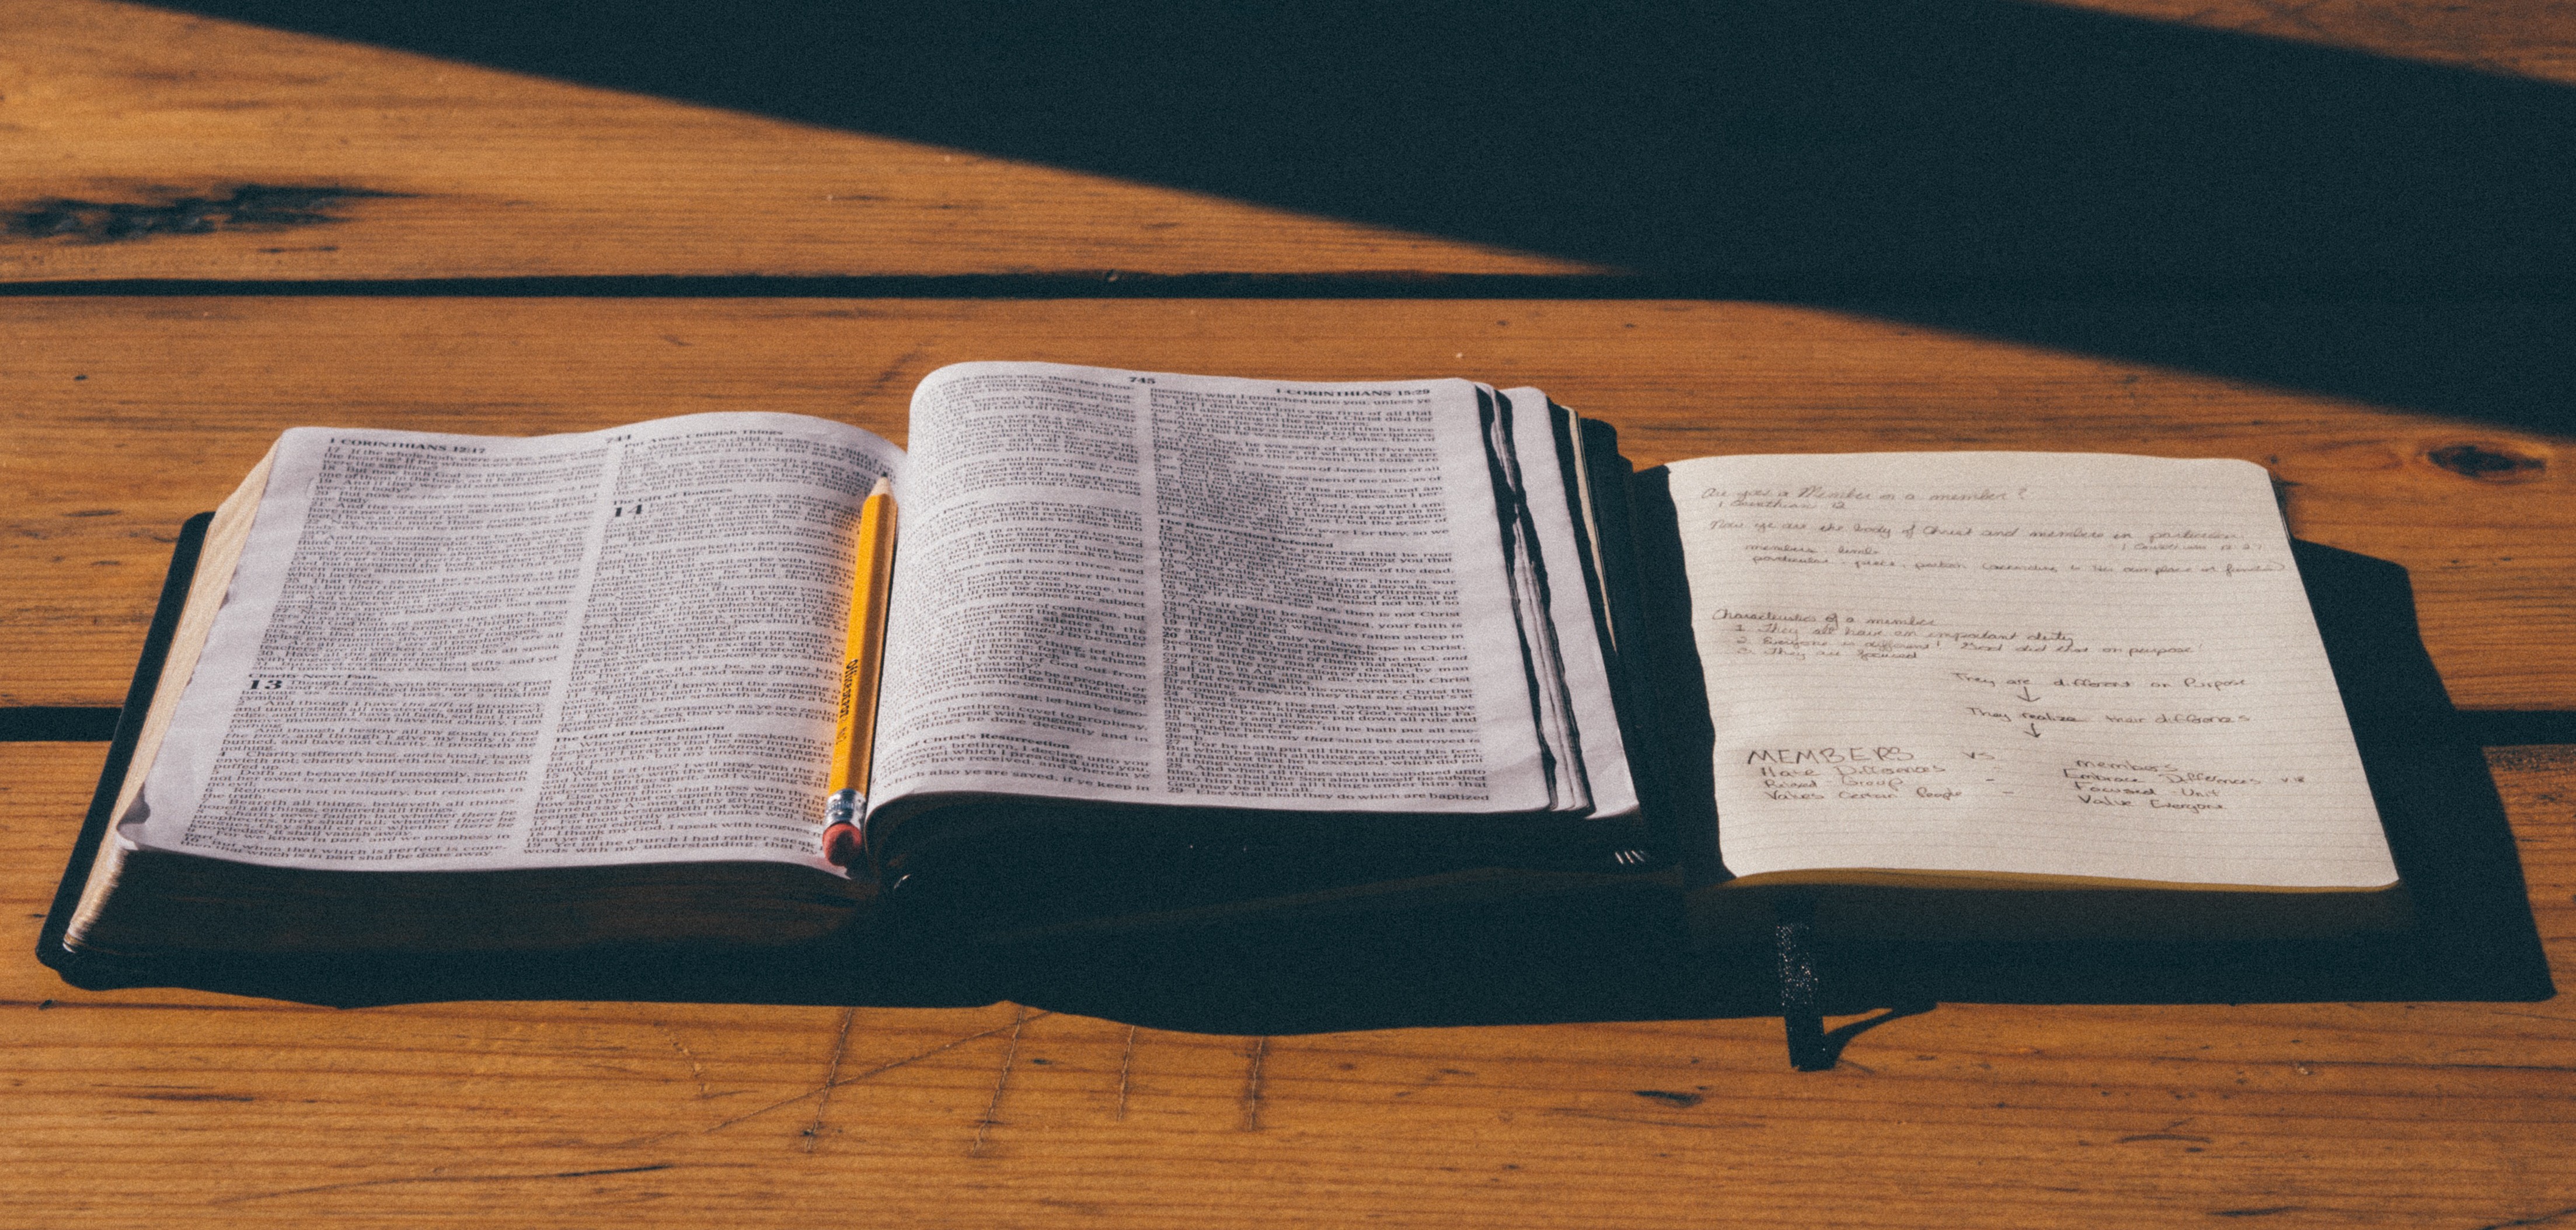 Have You Ever Struggled to Understand the Bible?